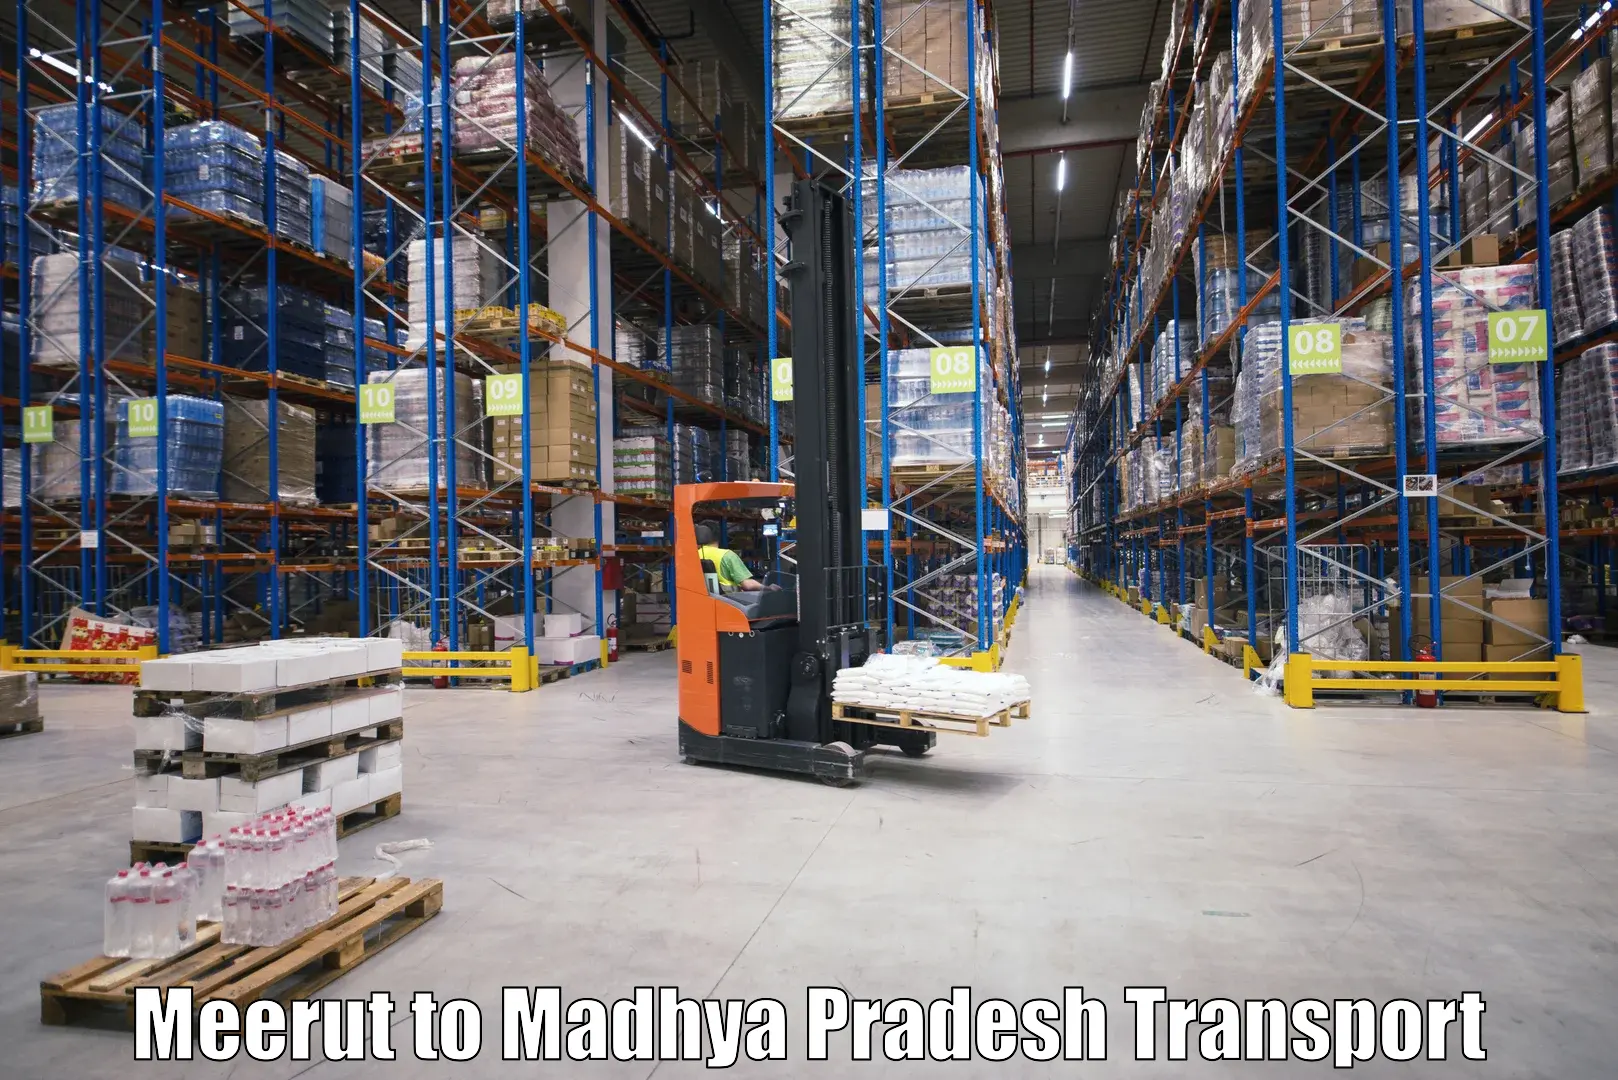 Truck transport companies in India Meerut to Bhopal